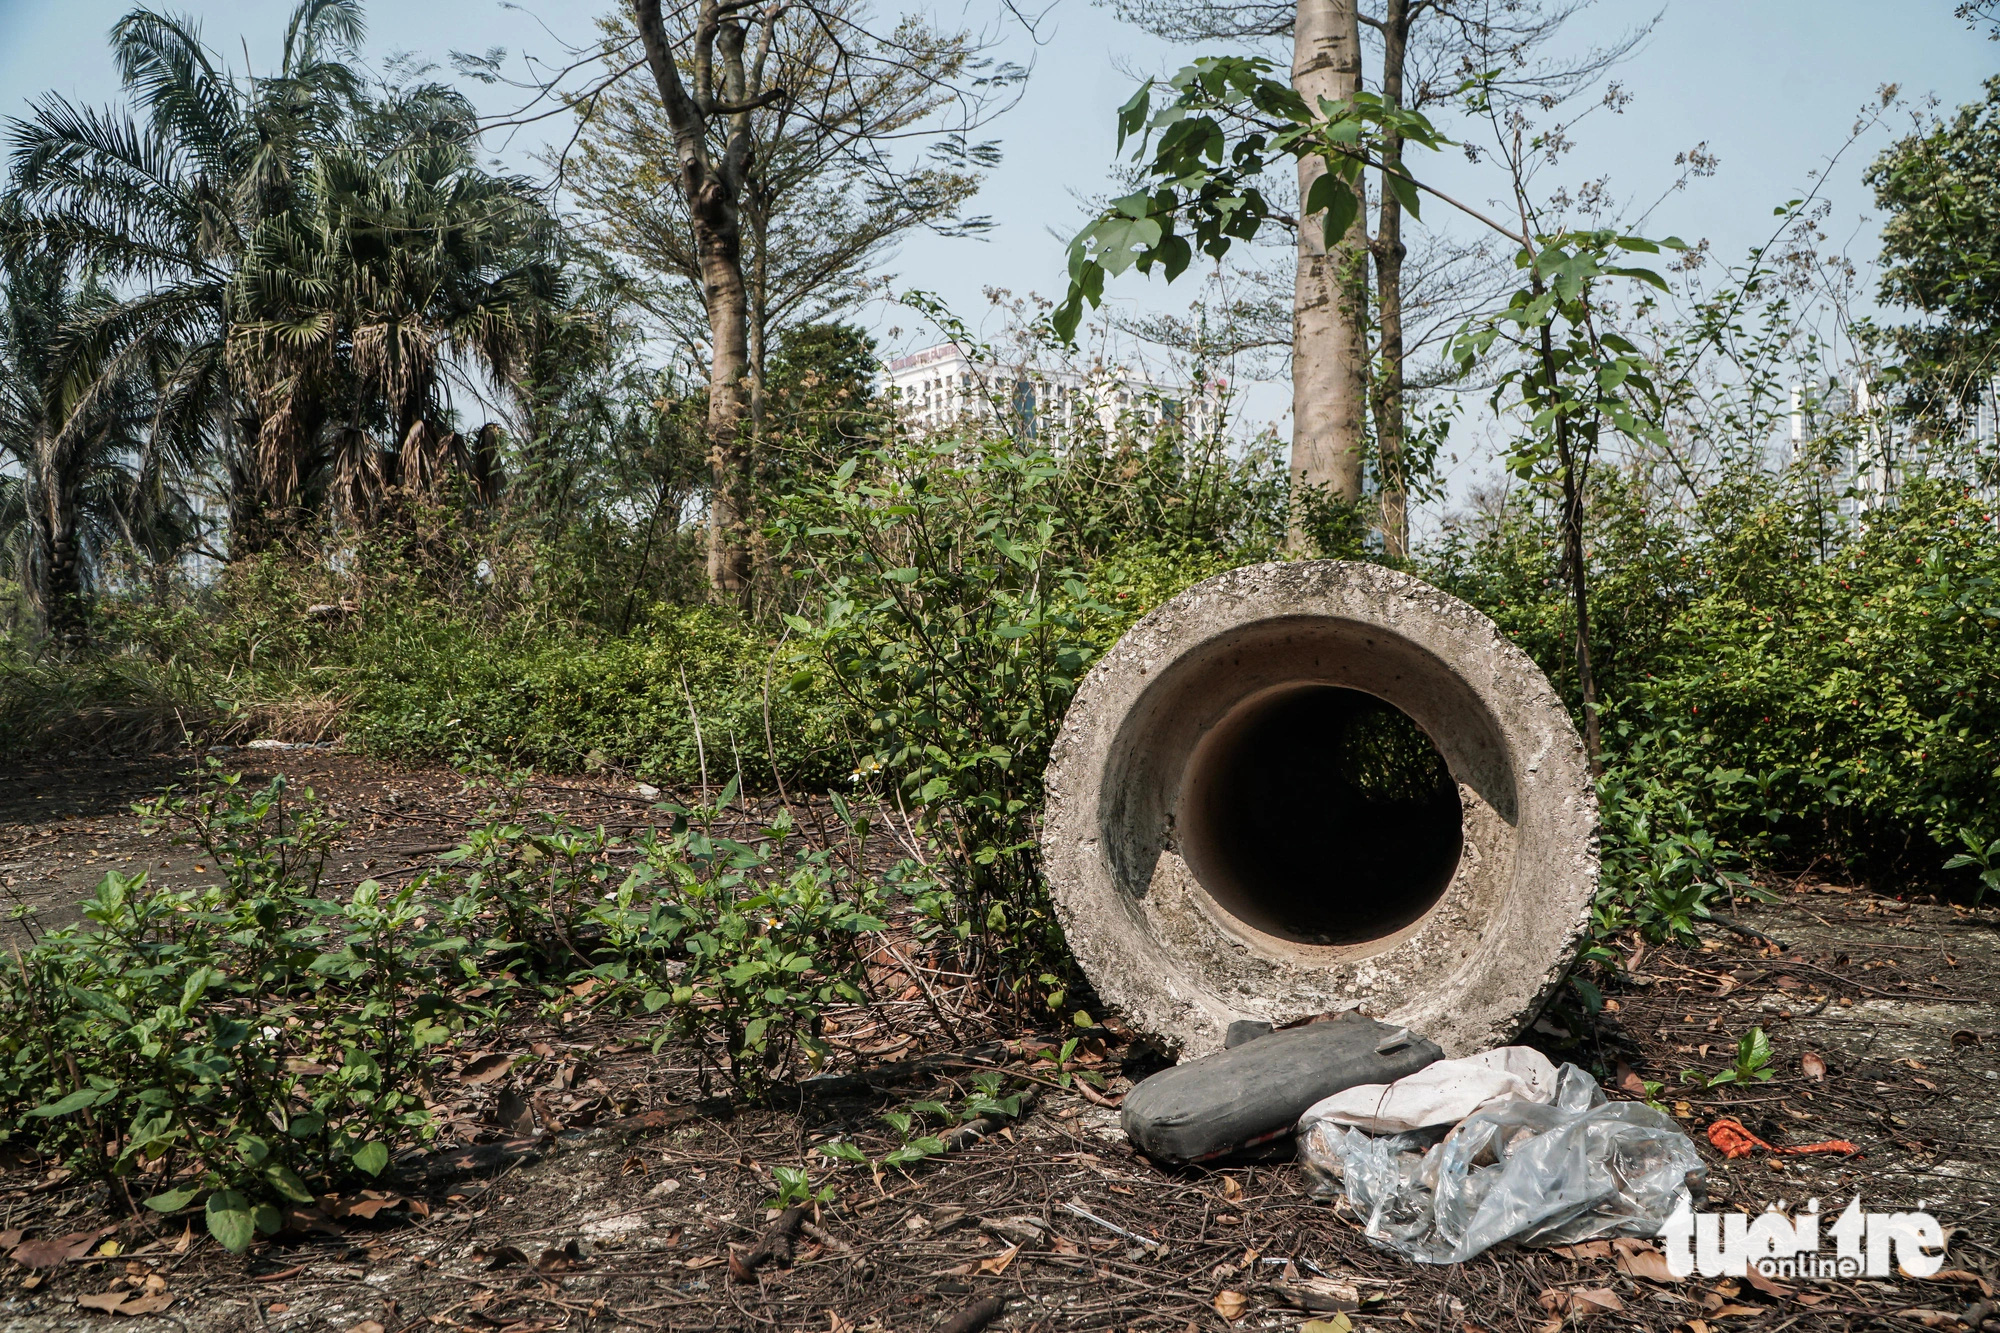 A deserted sight at the stalled Phung Khoang Lake Park project in Nam Tu Liem District, Hanoi. Photo: Pham Tuan / Tuoi Tre.